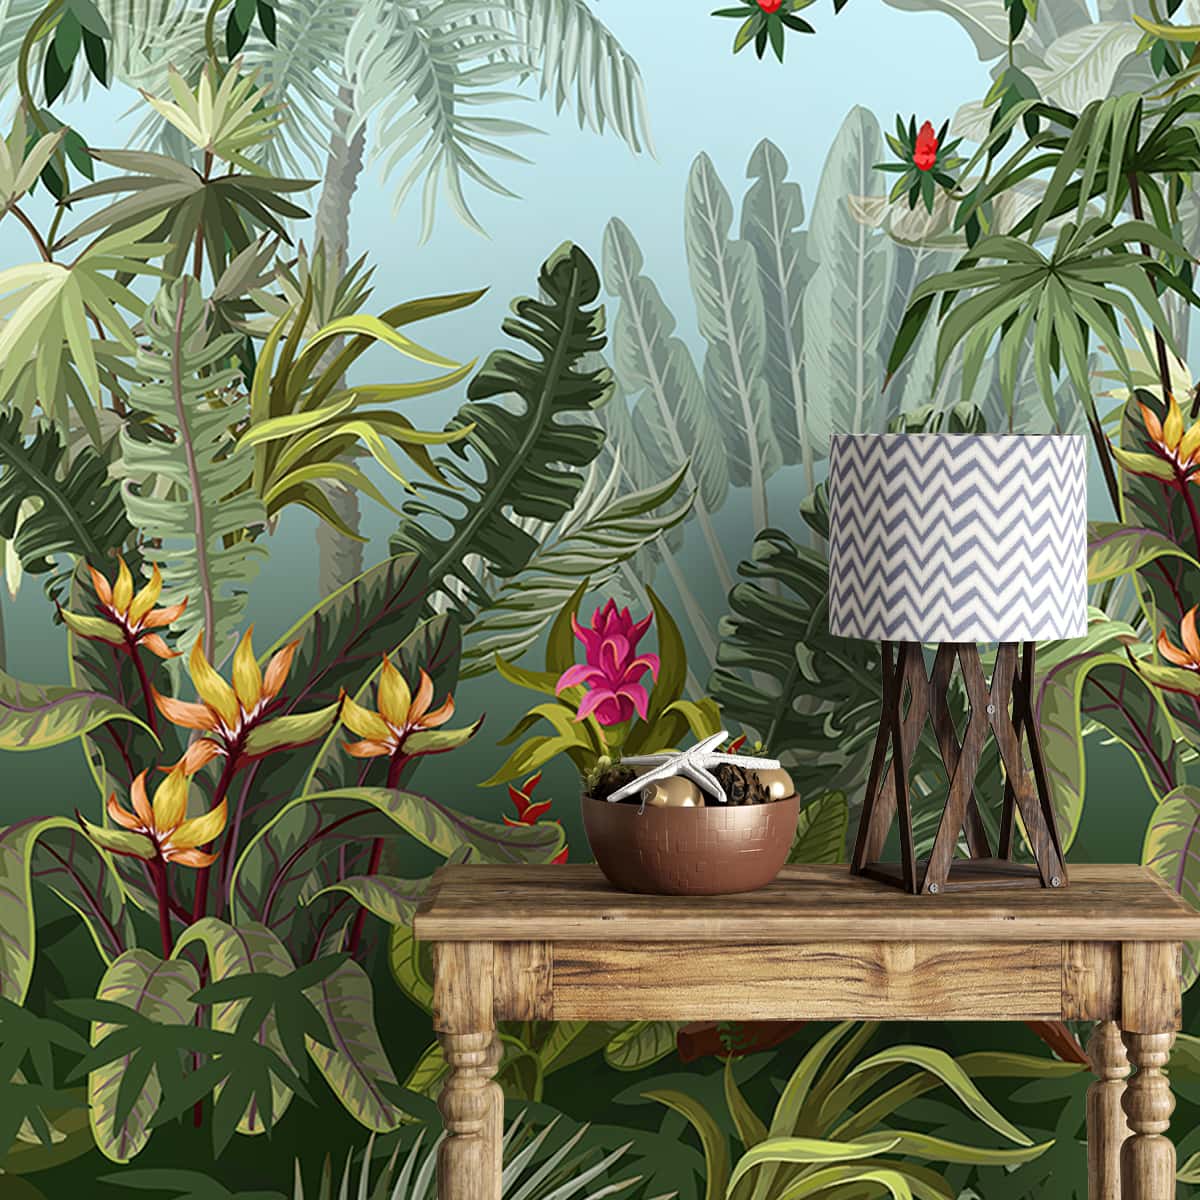 Colorful Tropical Theme Jhurmut Wallpapers, Customised